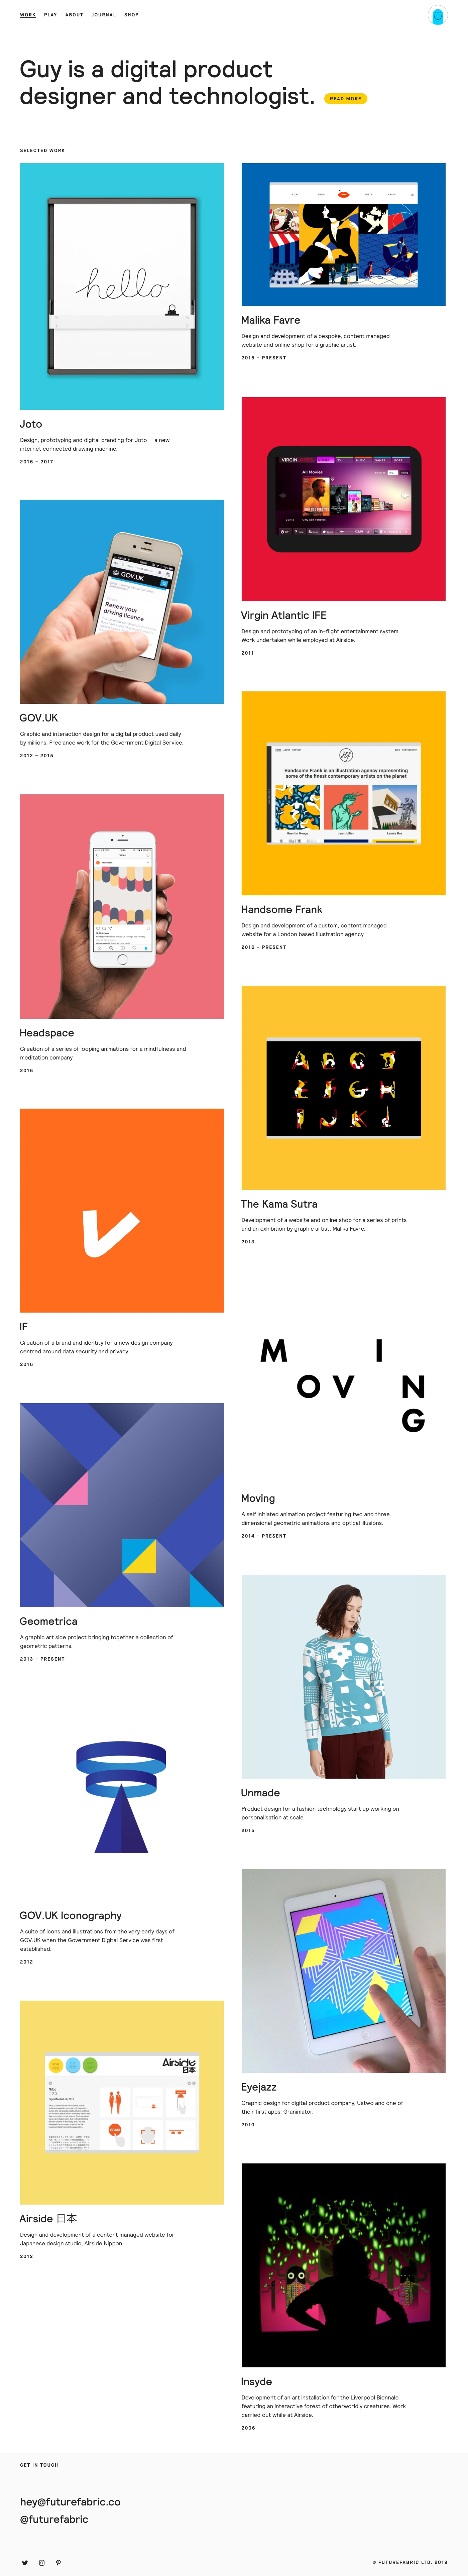 Guy Moorhouse Landing Page Example: Guy is a digital product designer and technologist